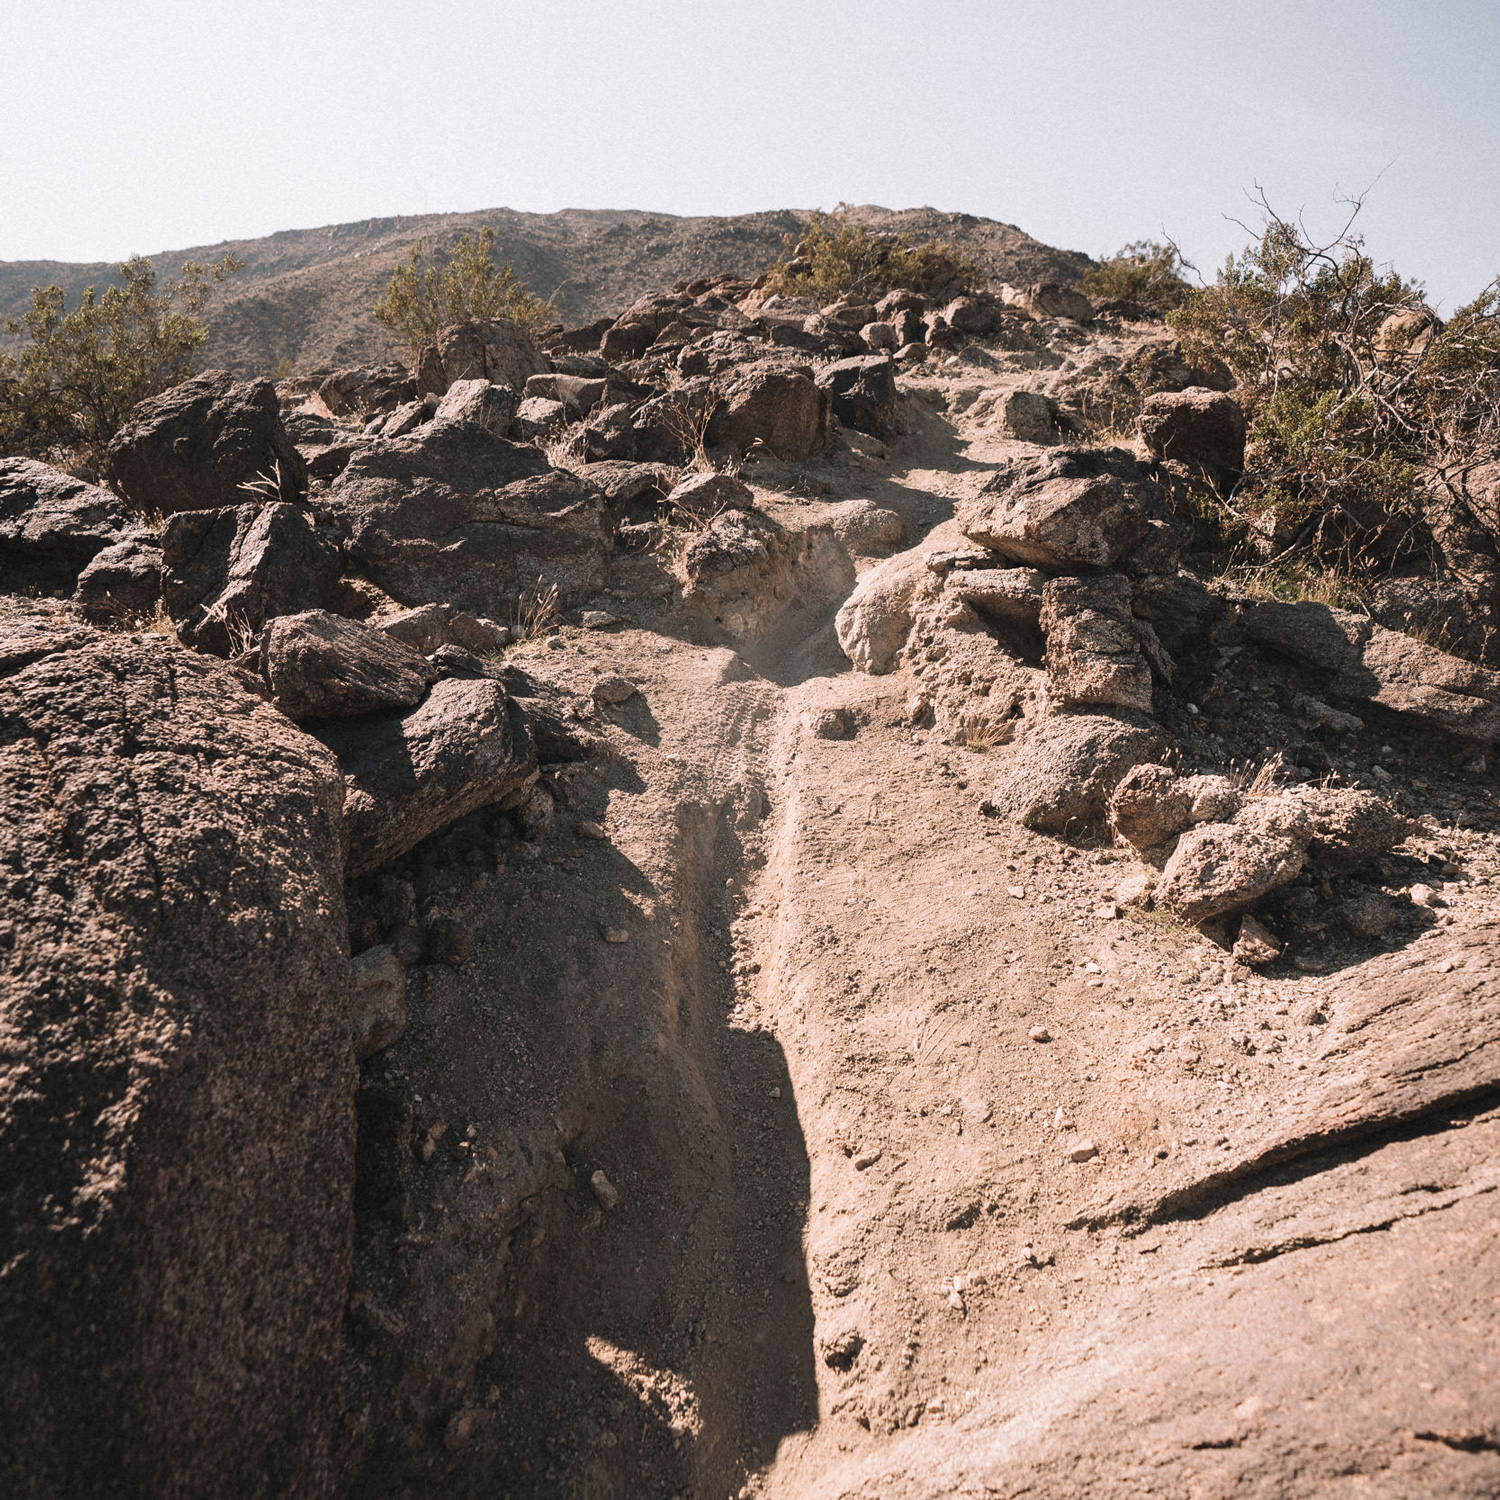 2020 eMTB Roundup: The Setting - Palm Springs